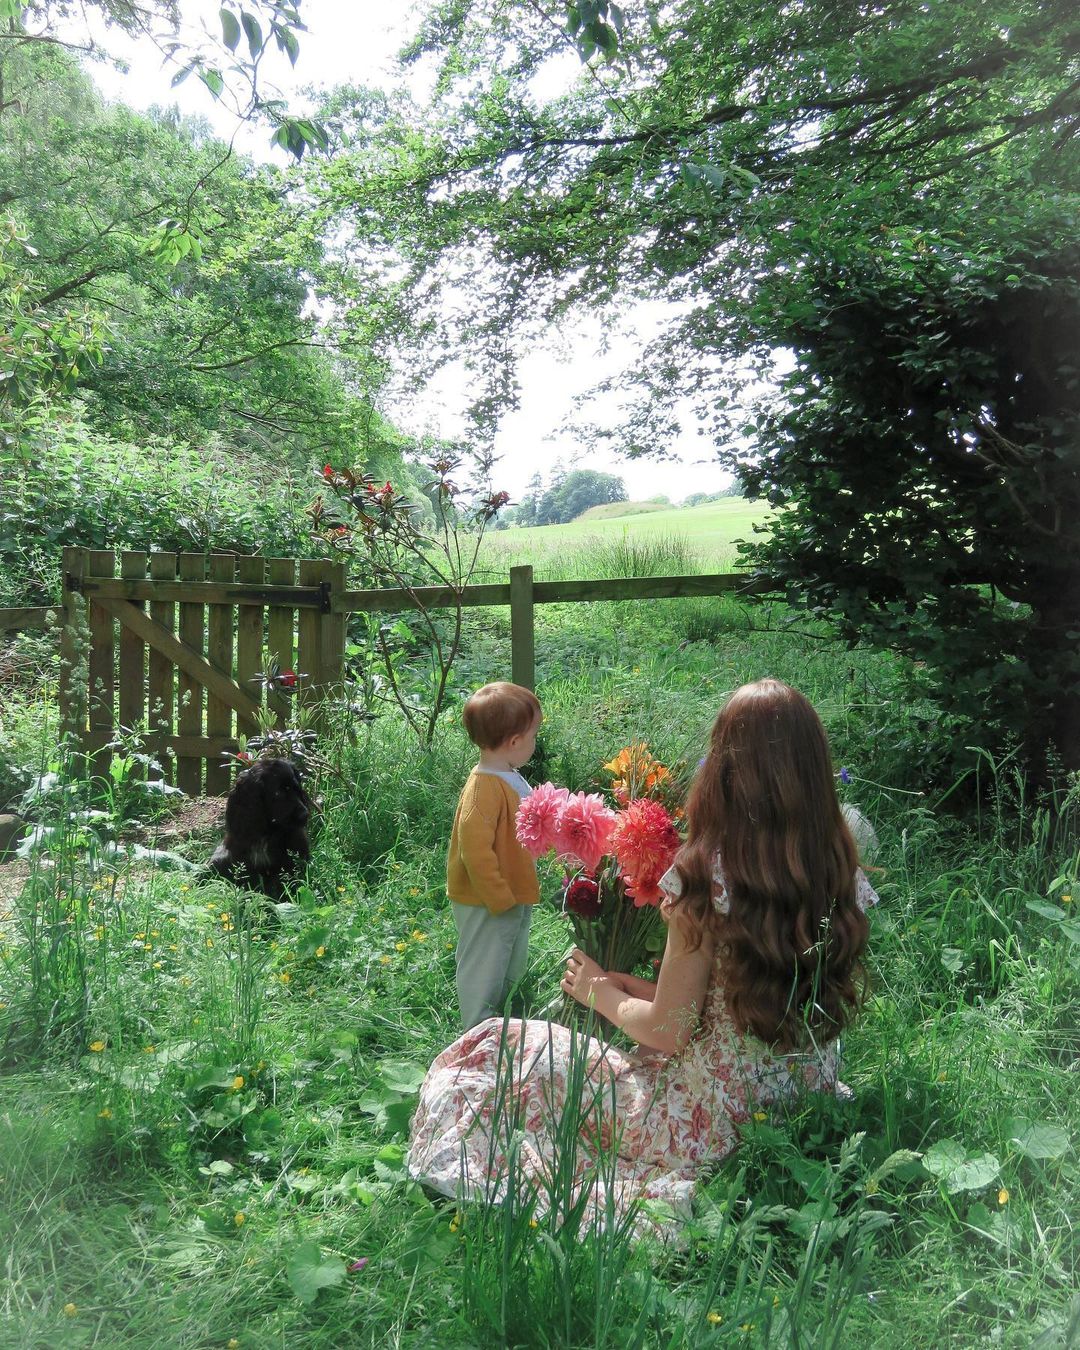 Woman in a Garden with a Young Child. Photo by Instagram user @thelittlepinkcottage_